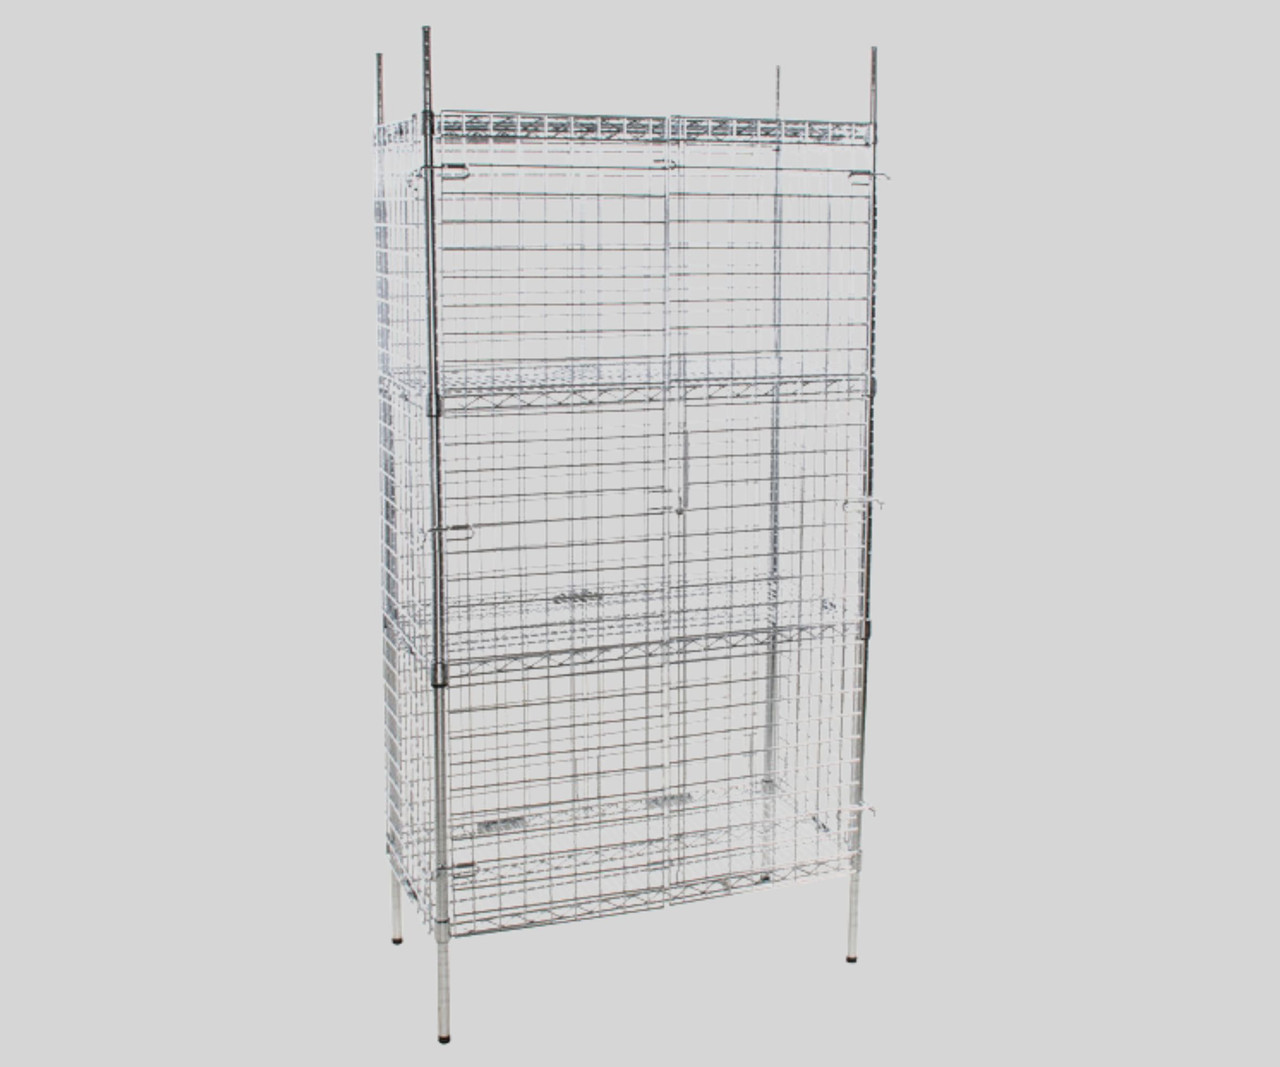 Chicken Pieces CP NSF Stationary Chrome Wire Security Cage Kit - 18" x 36" x 74" | Secure & Stable Storage Solution